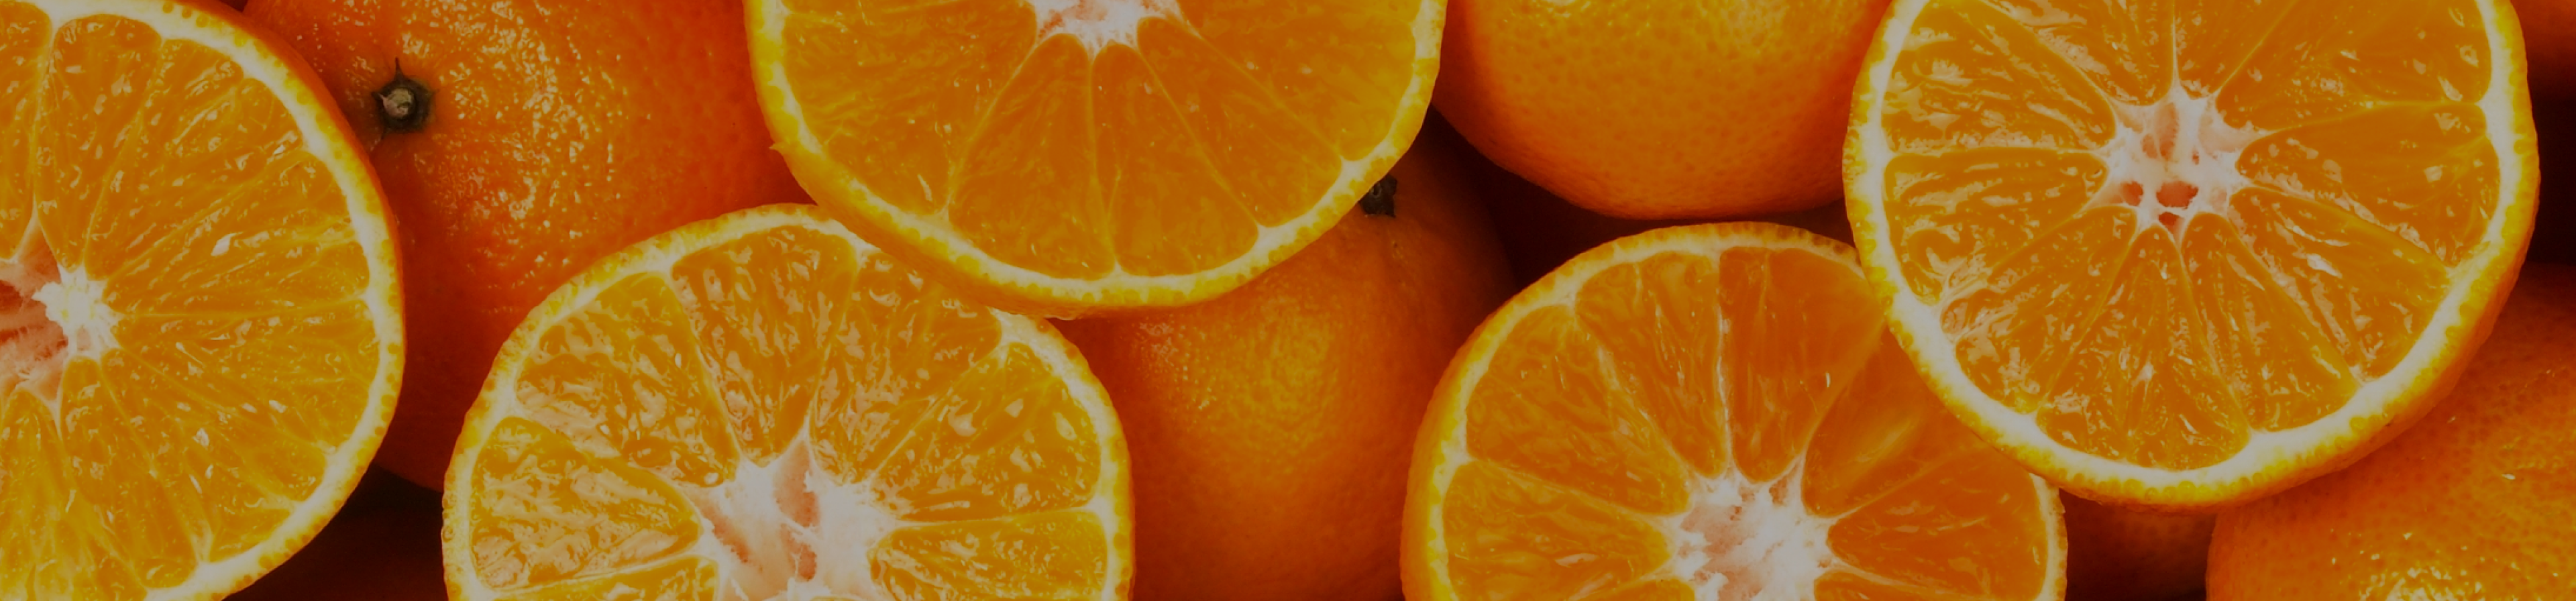 A wide horizontal image of a bunch of orange fruits - some whole, some cut in half